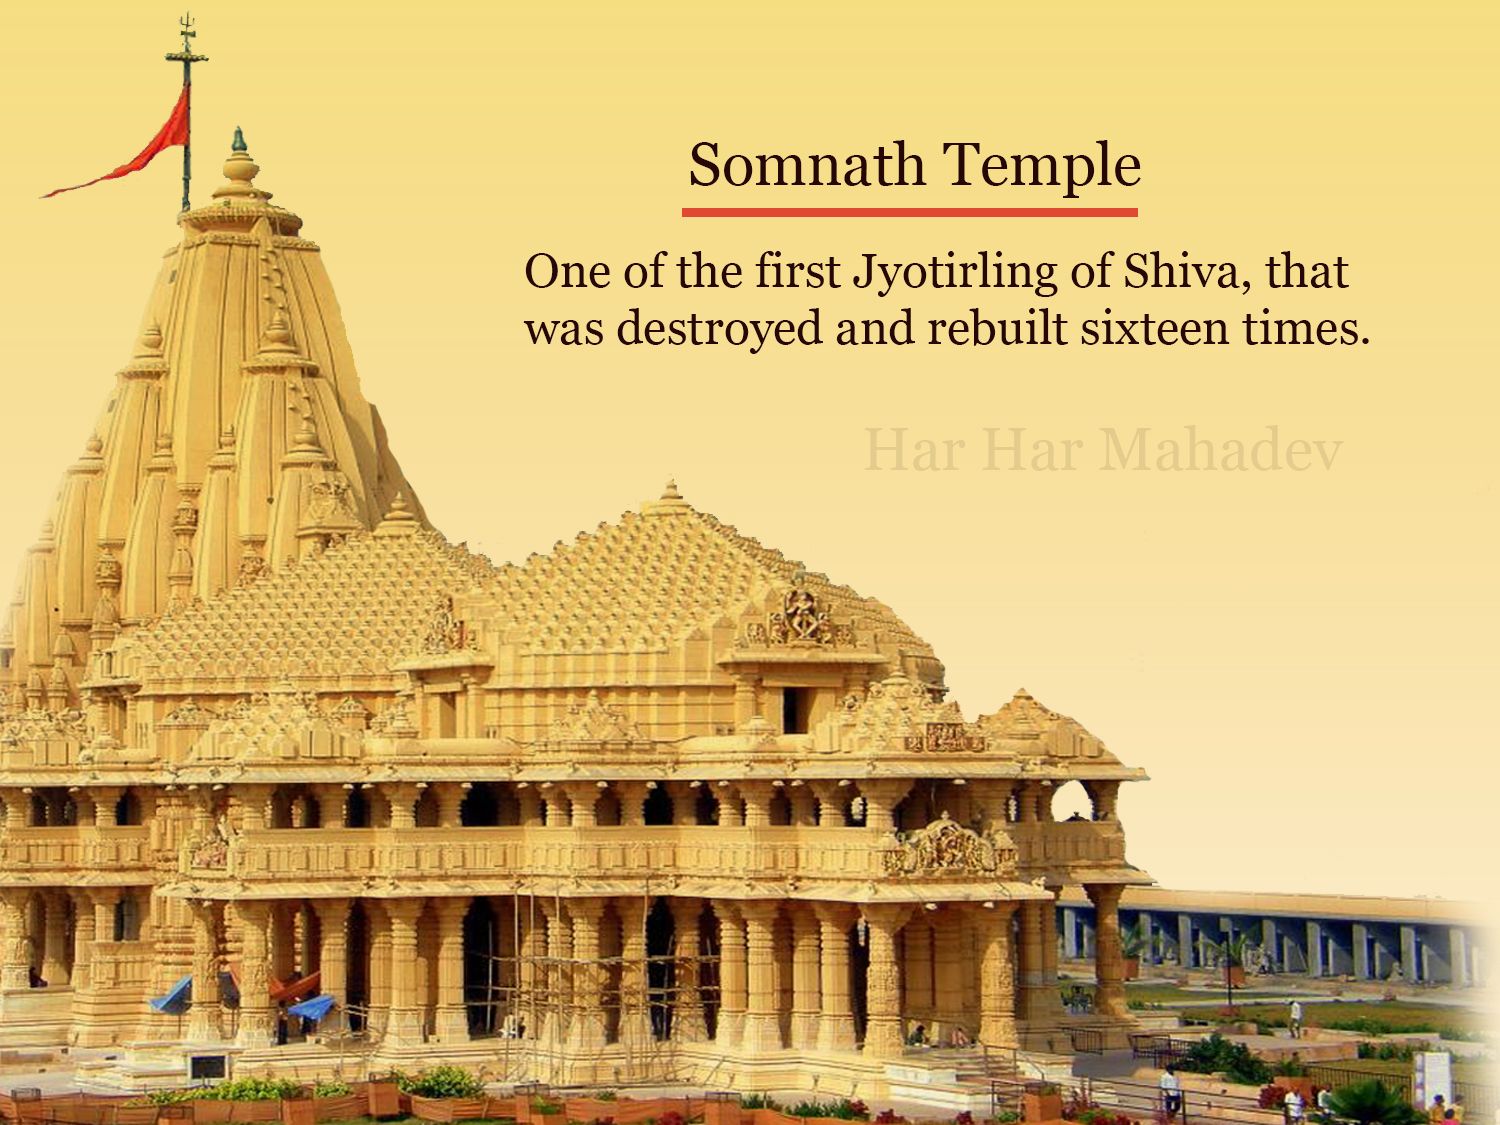 About Somnath Temple